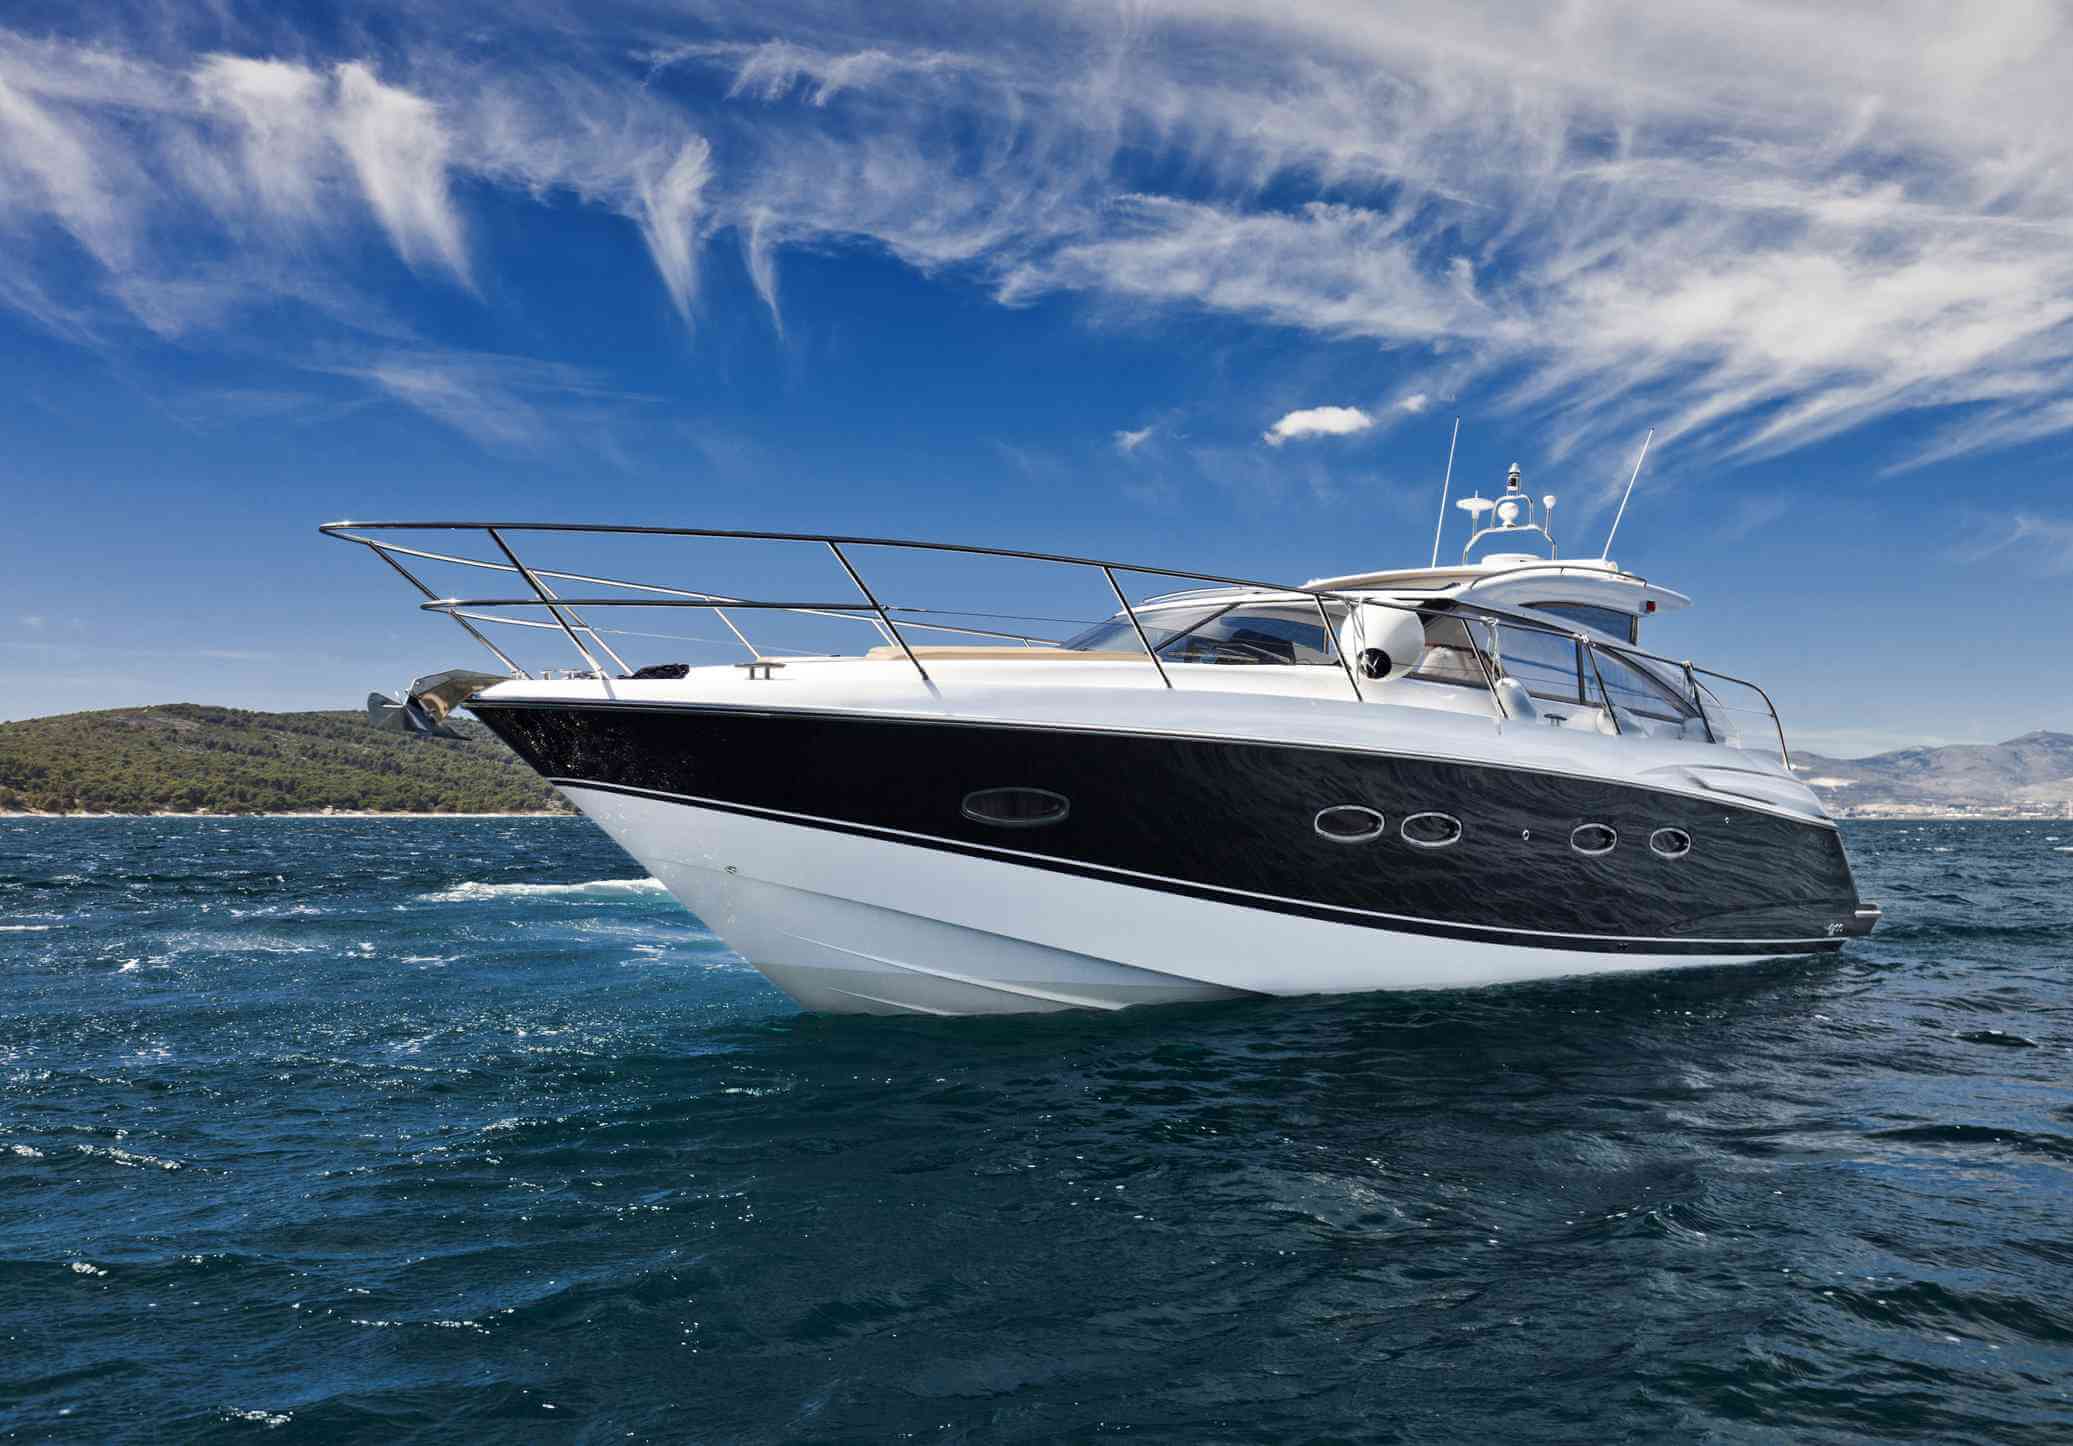 Four Things to Consider Before Renting A Yacht